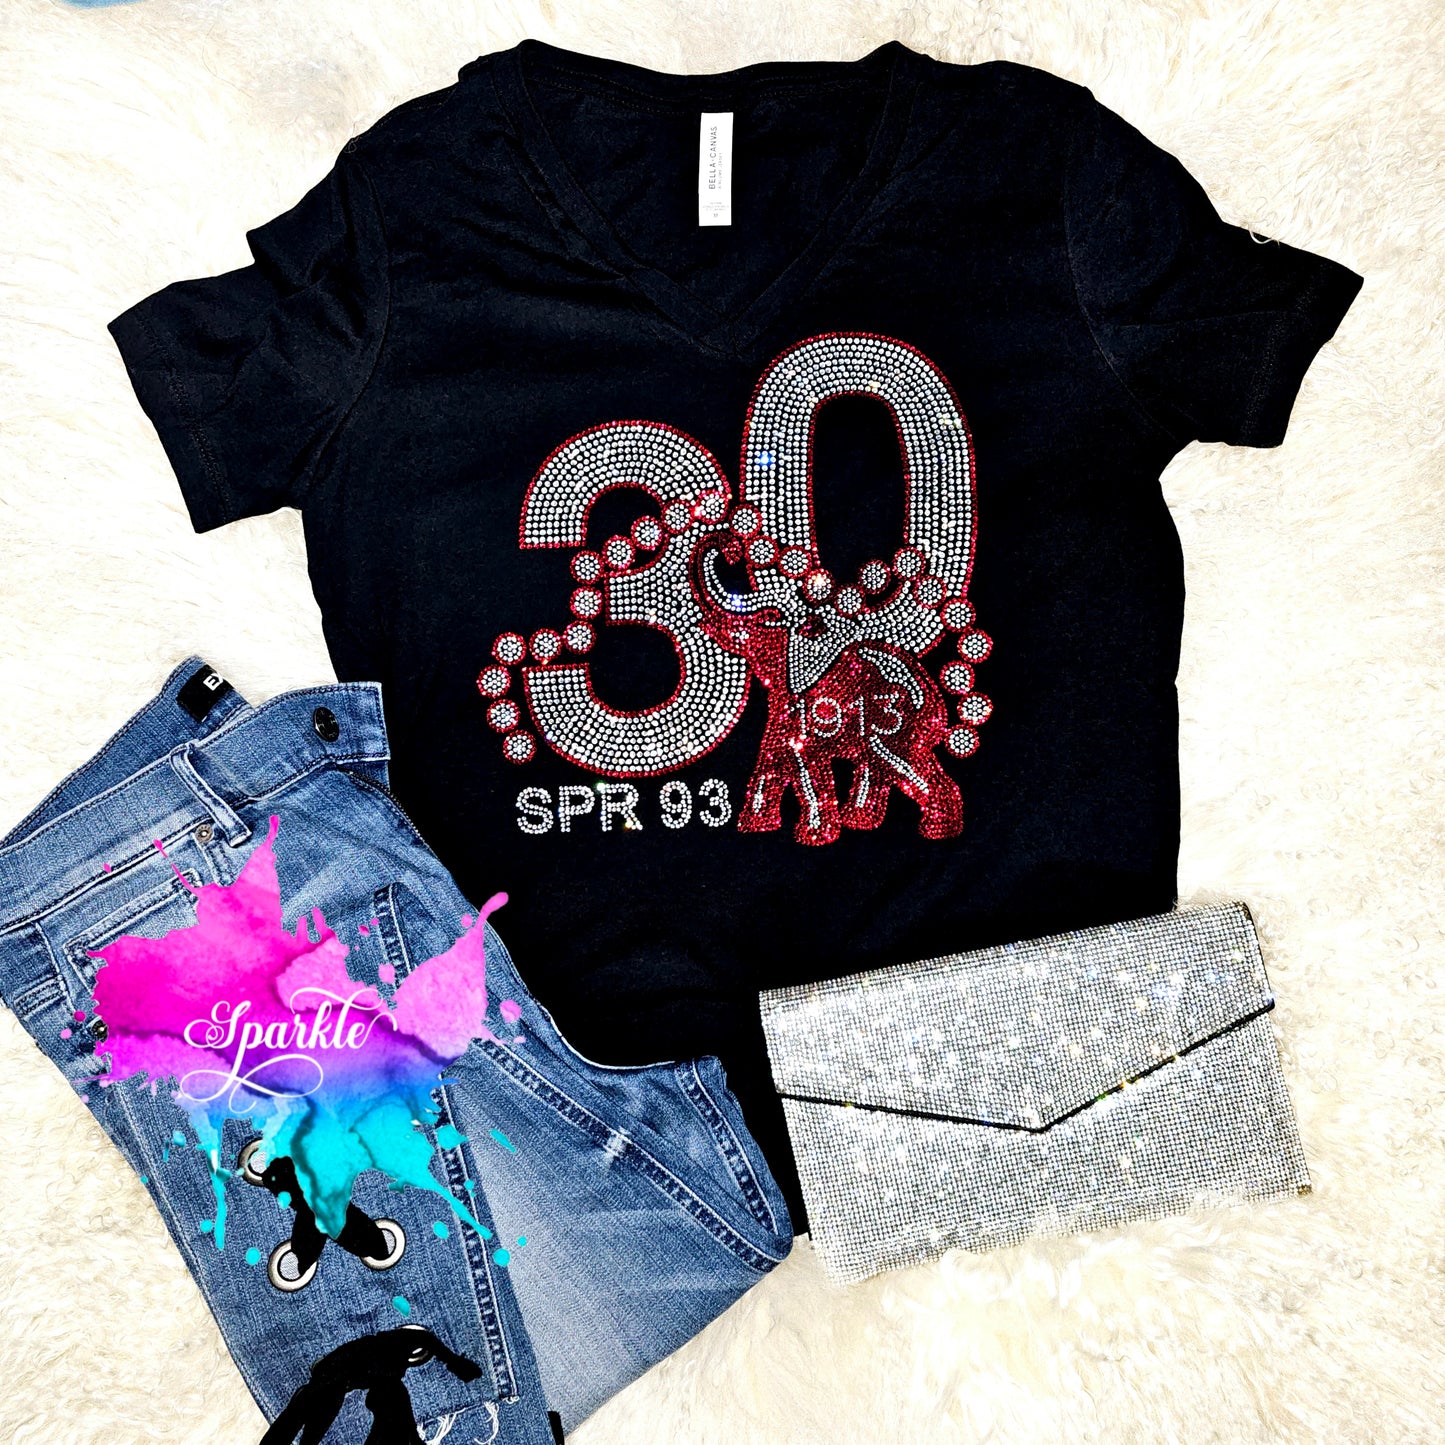 30 Years in the Dynasty Crystallized Tee